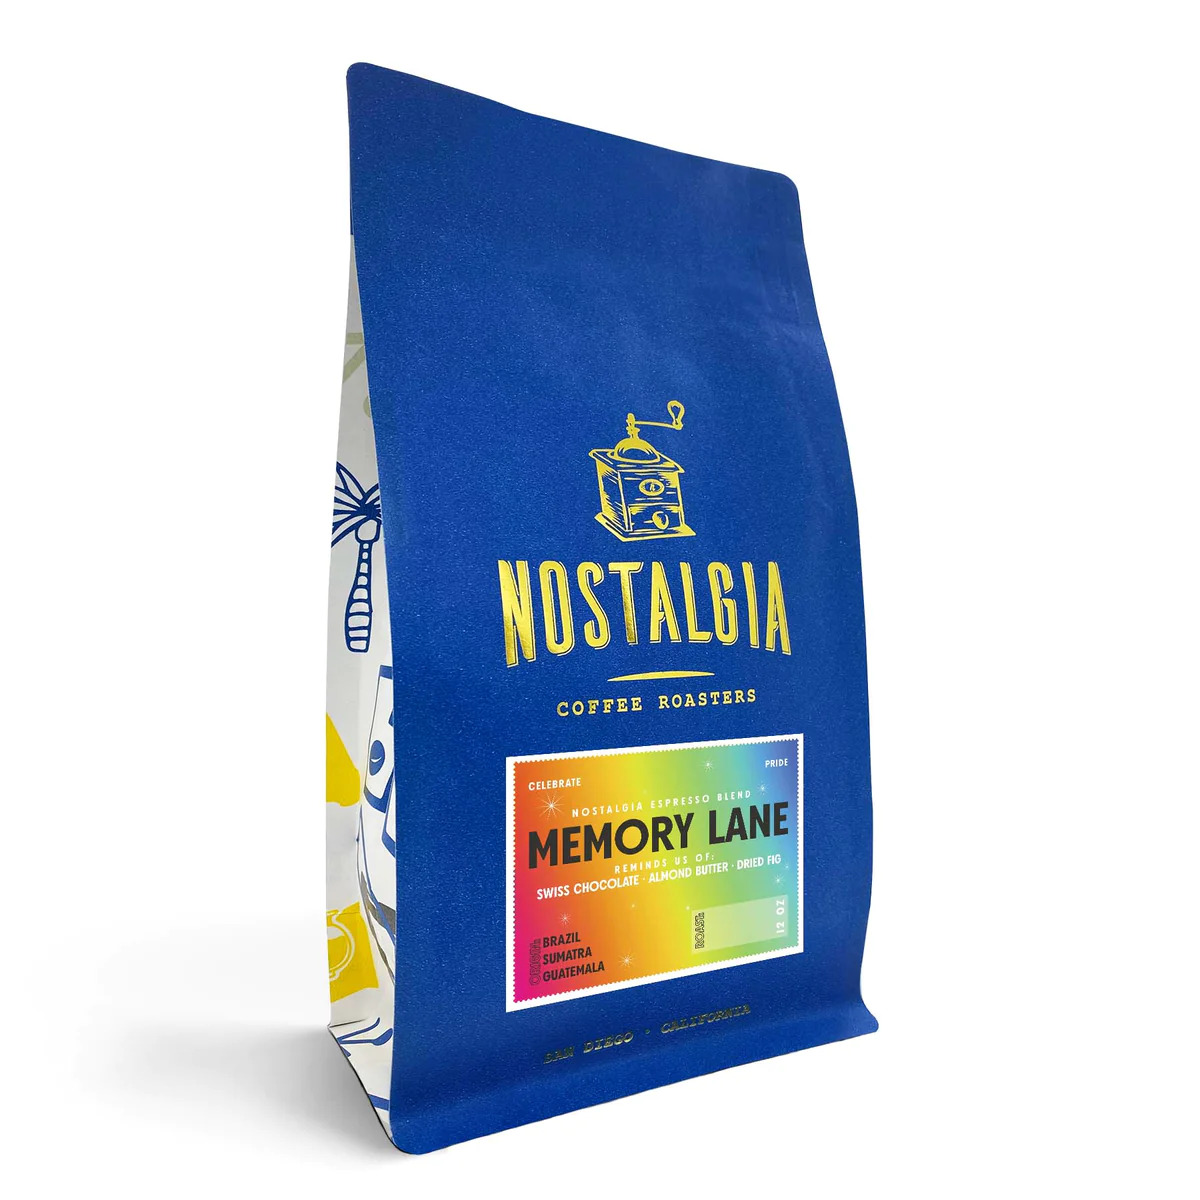 Nostalgia Coffee Roasters package of coffee